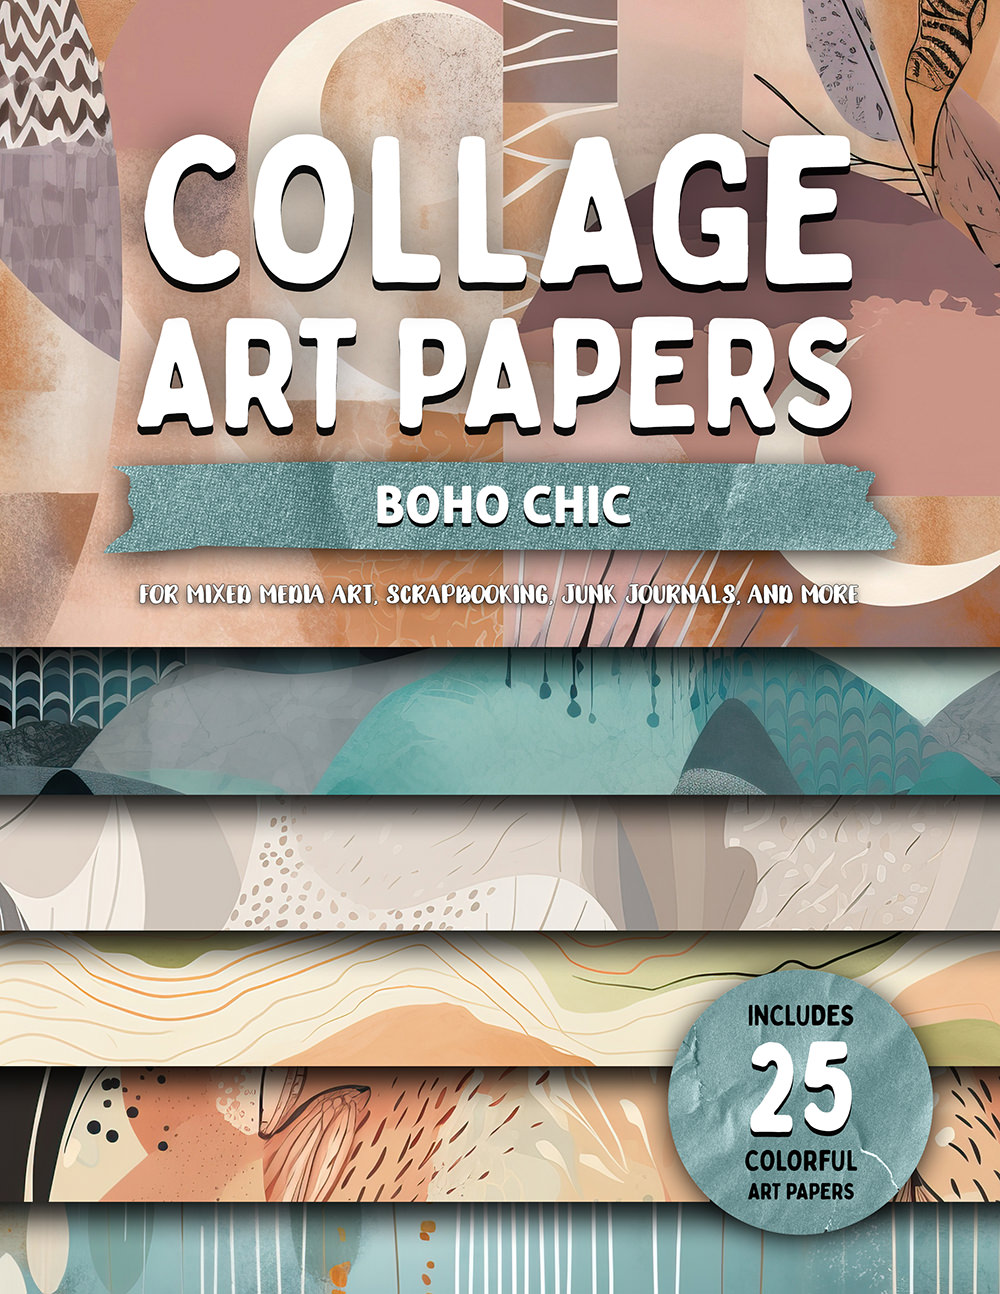 Collage Art Papers: Boho Chic